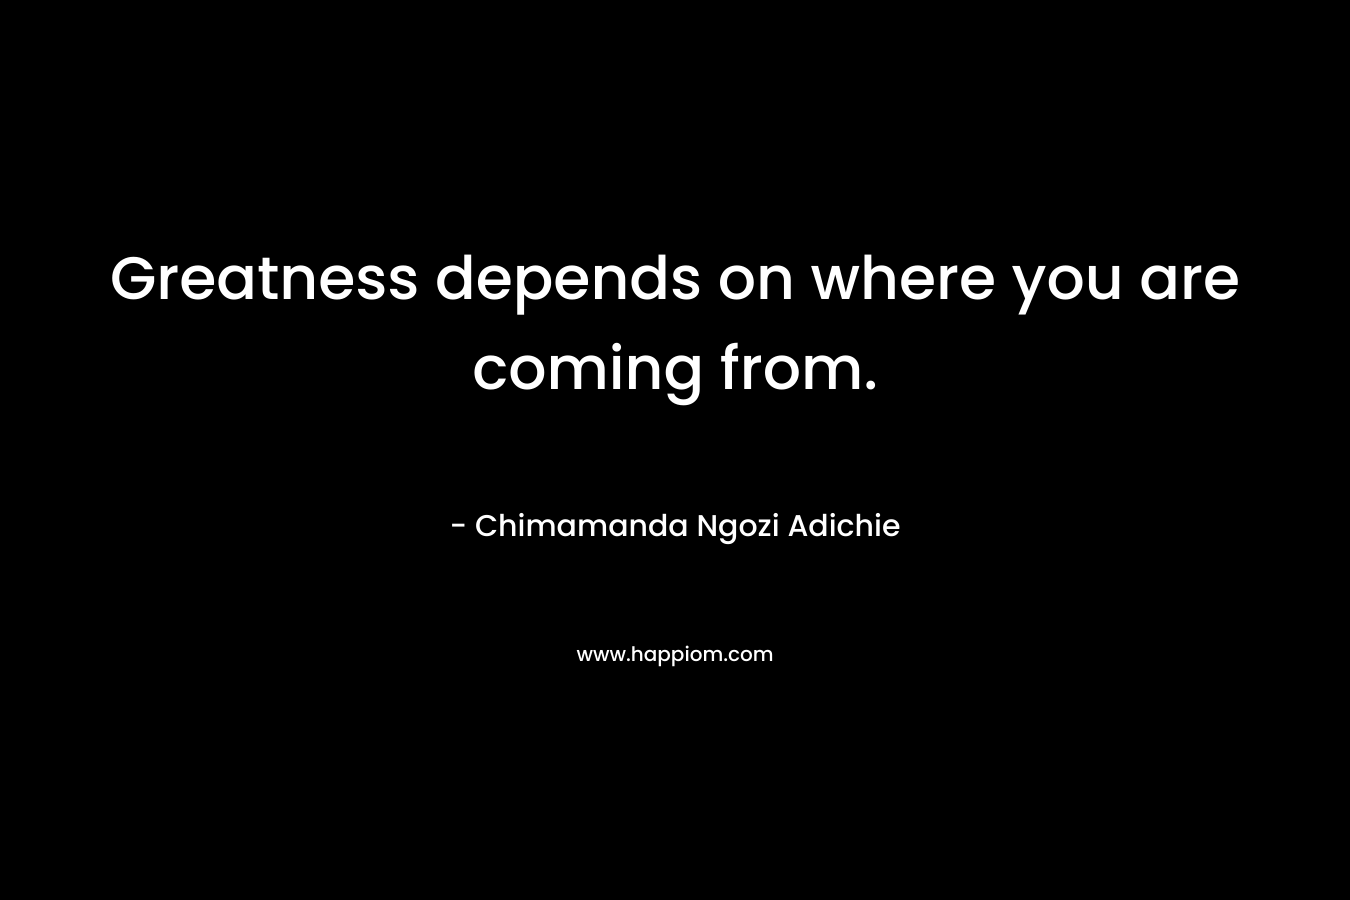 Greatness depends on where you are coming from.